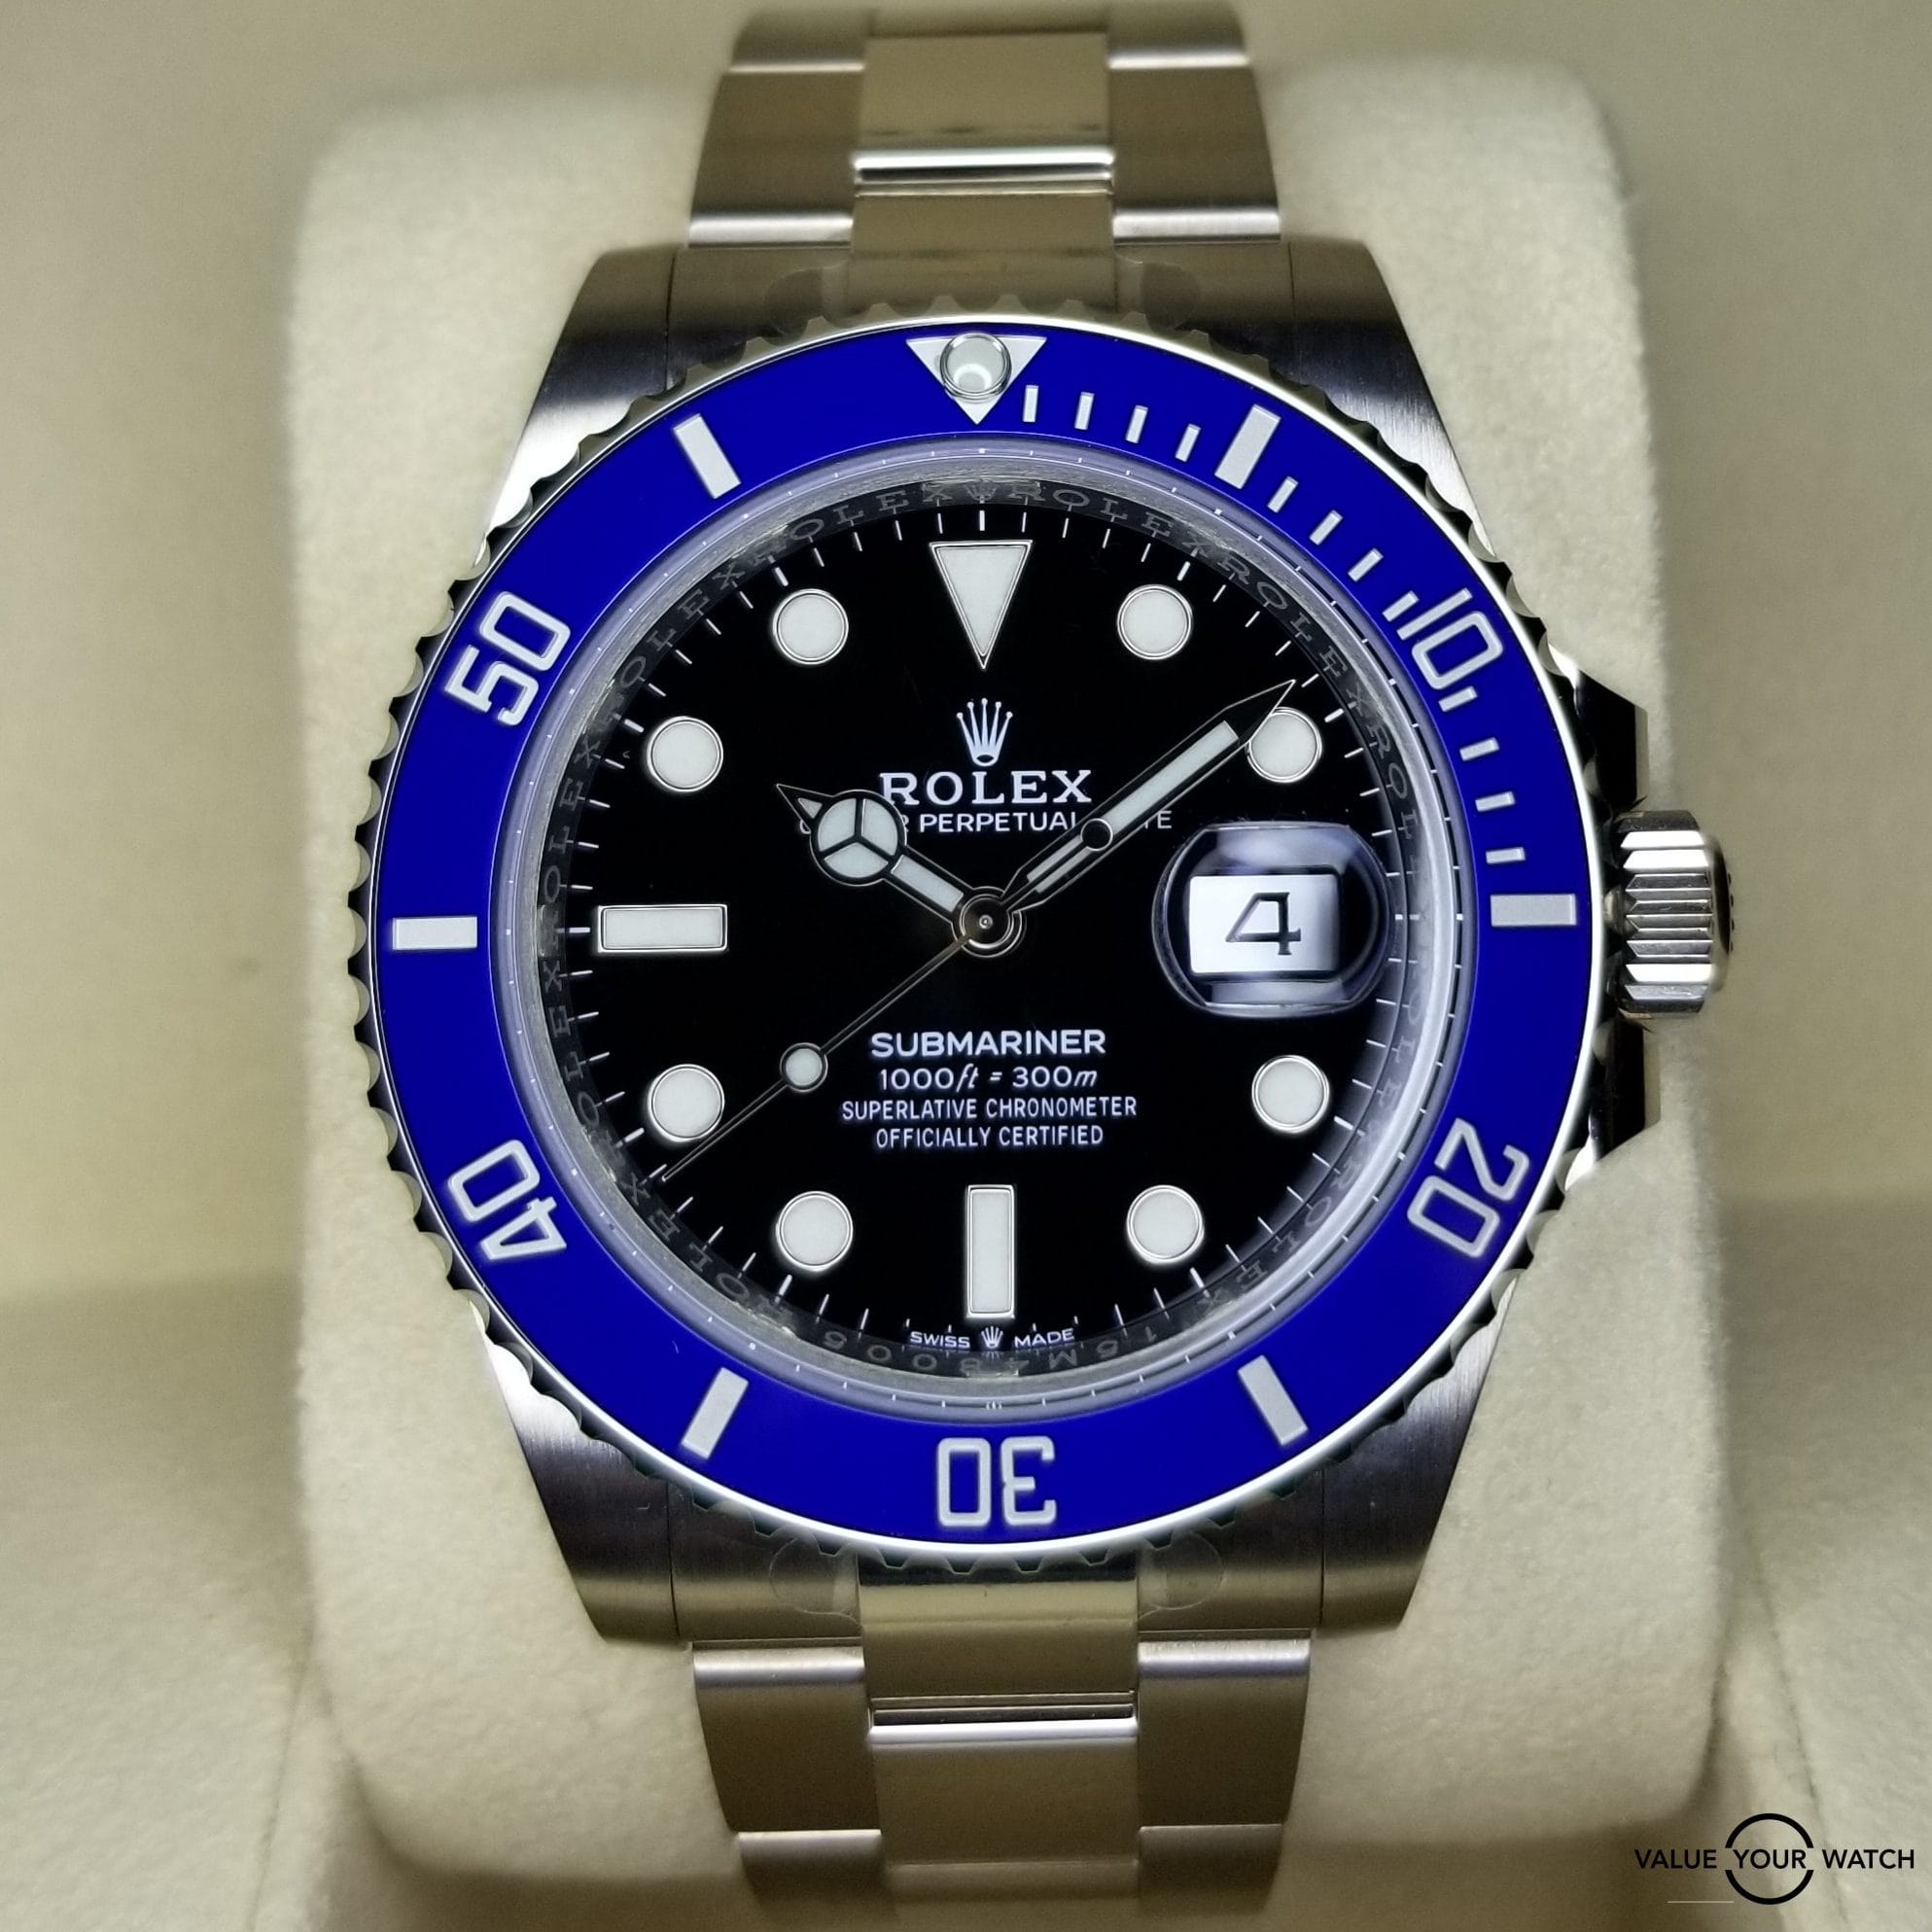 All About the Rolex Submariner